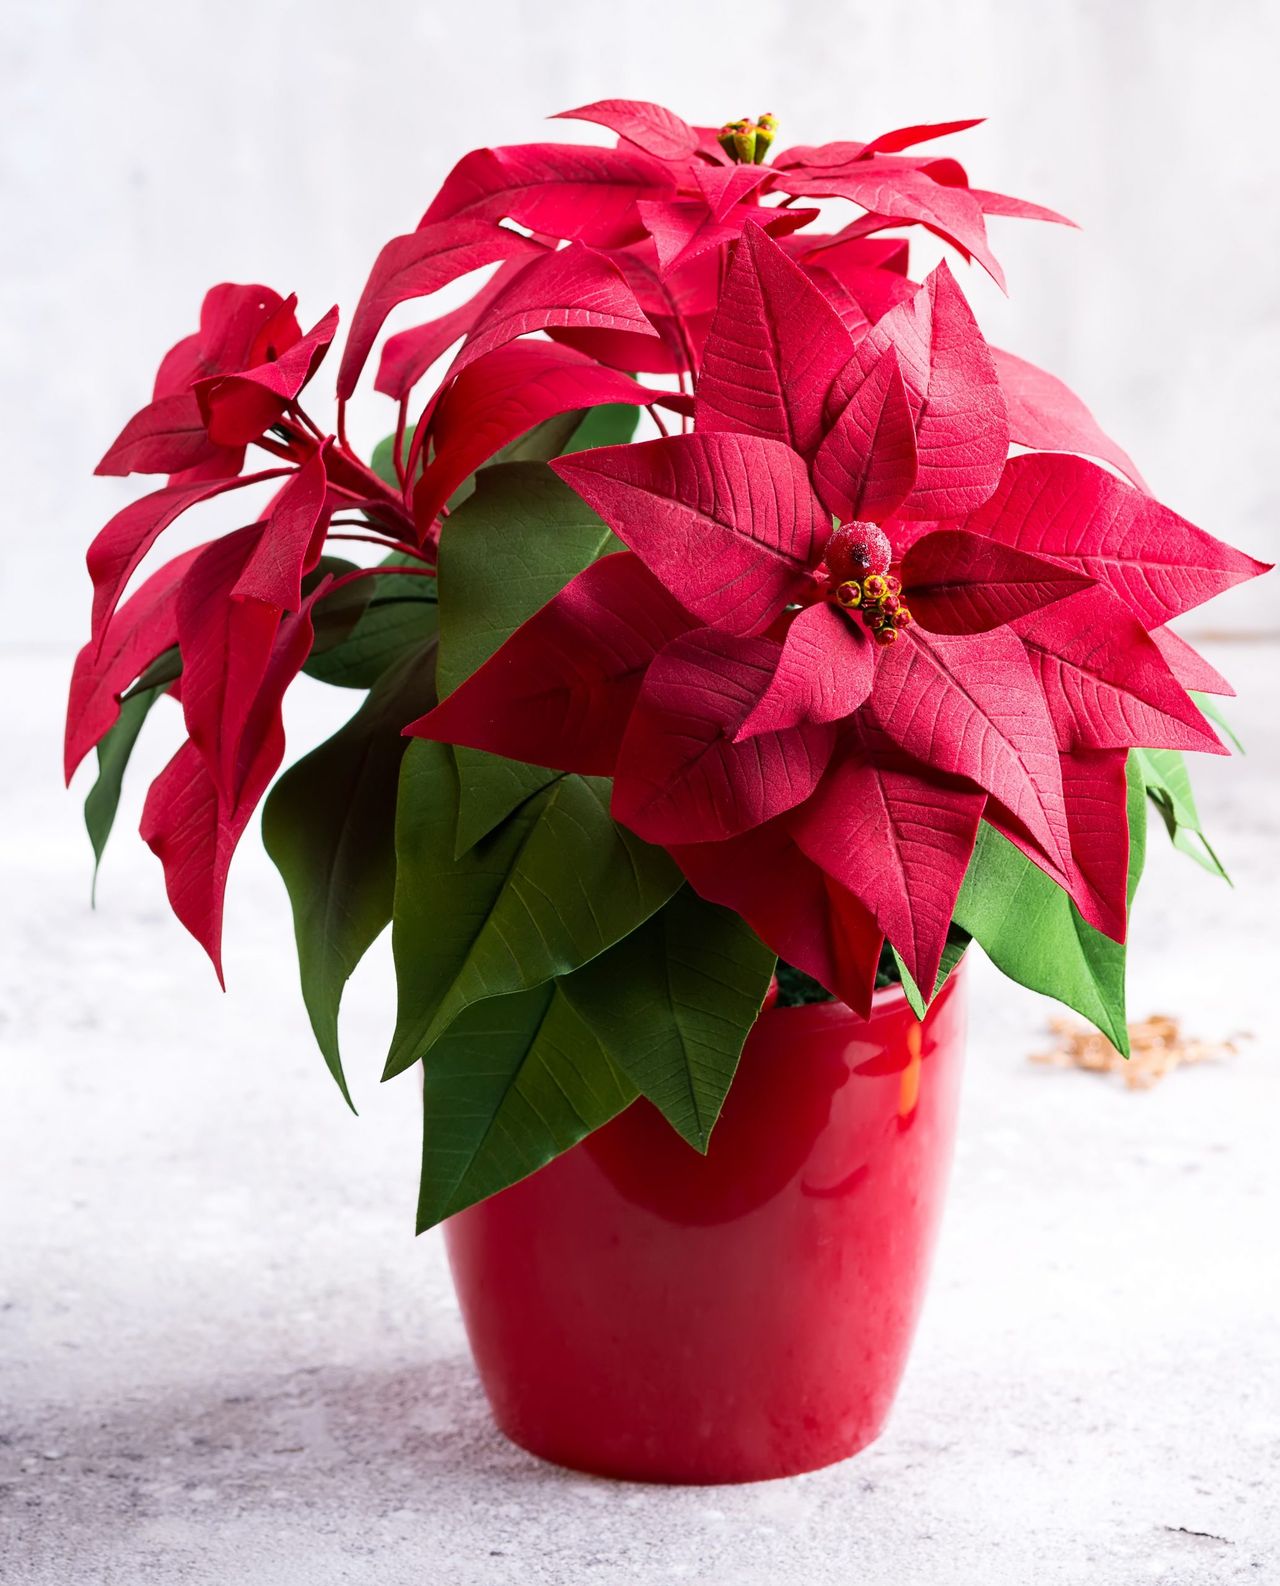 Red poinsettia christmas plant on a stone gray background with copy space.